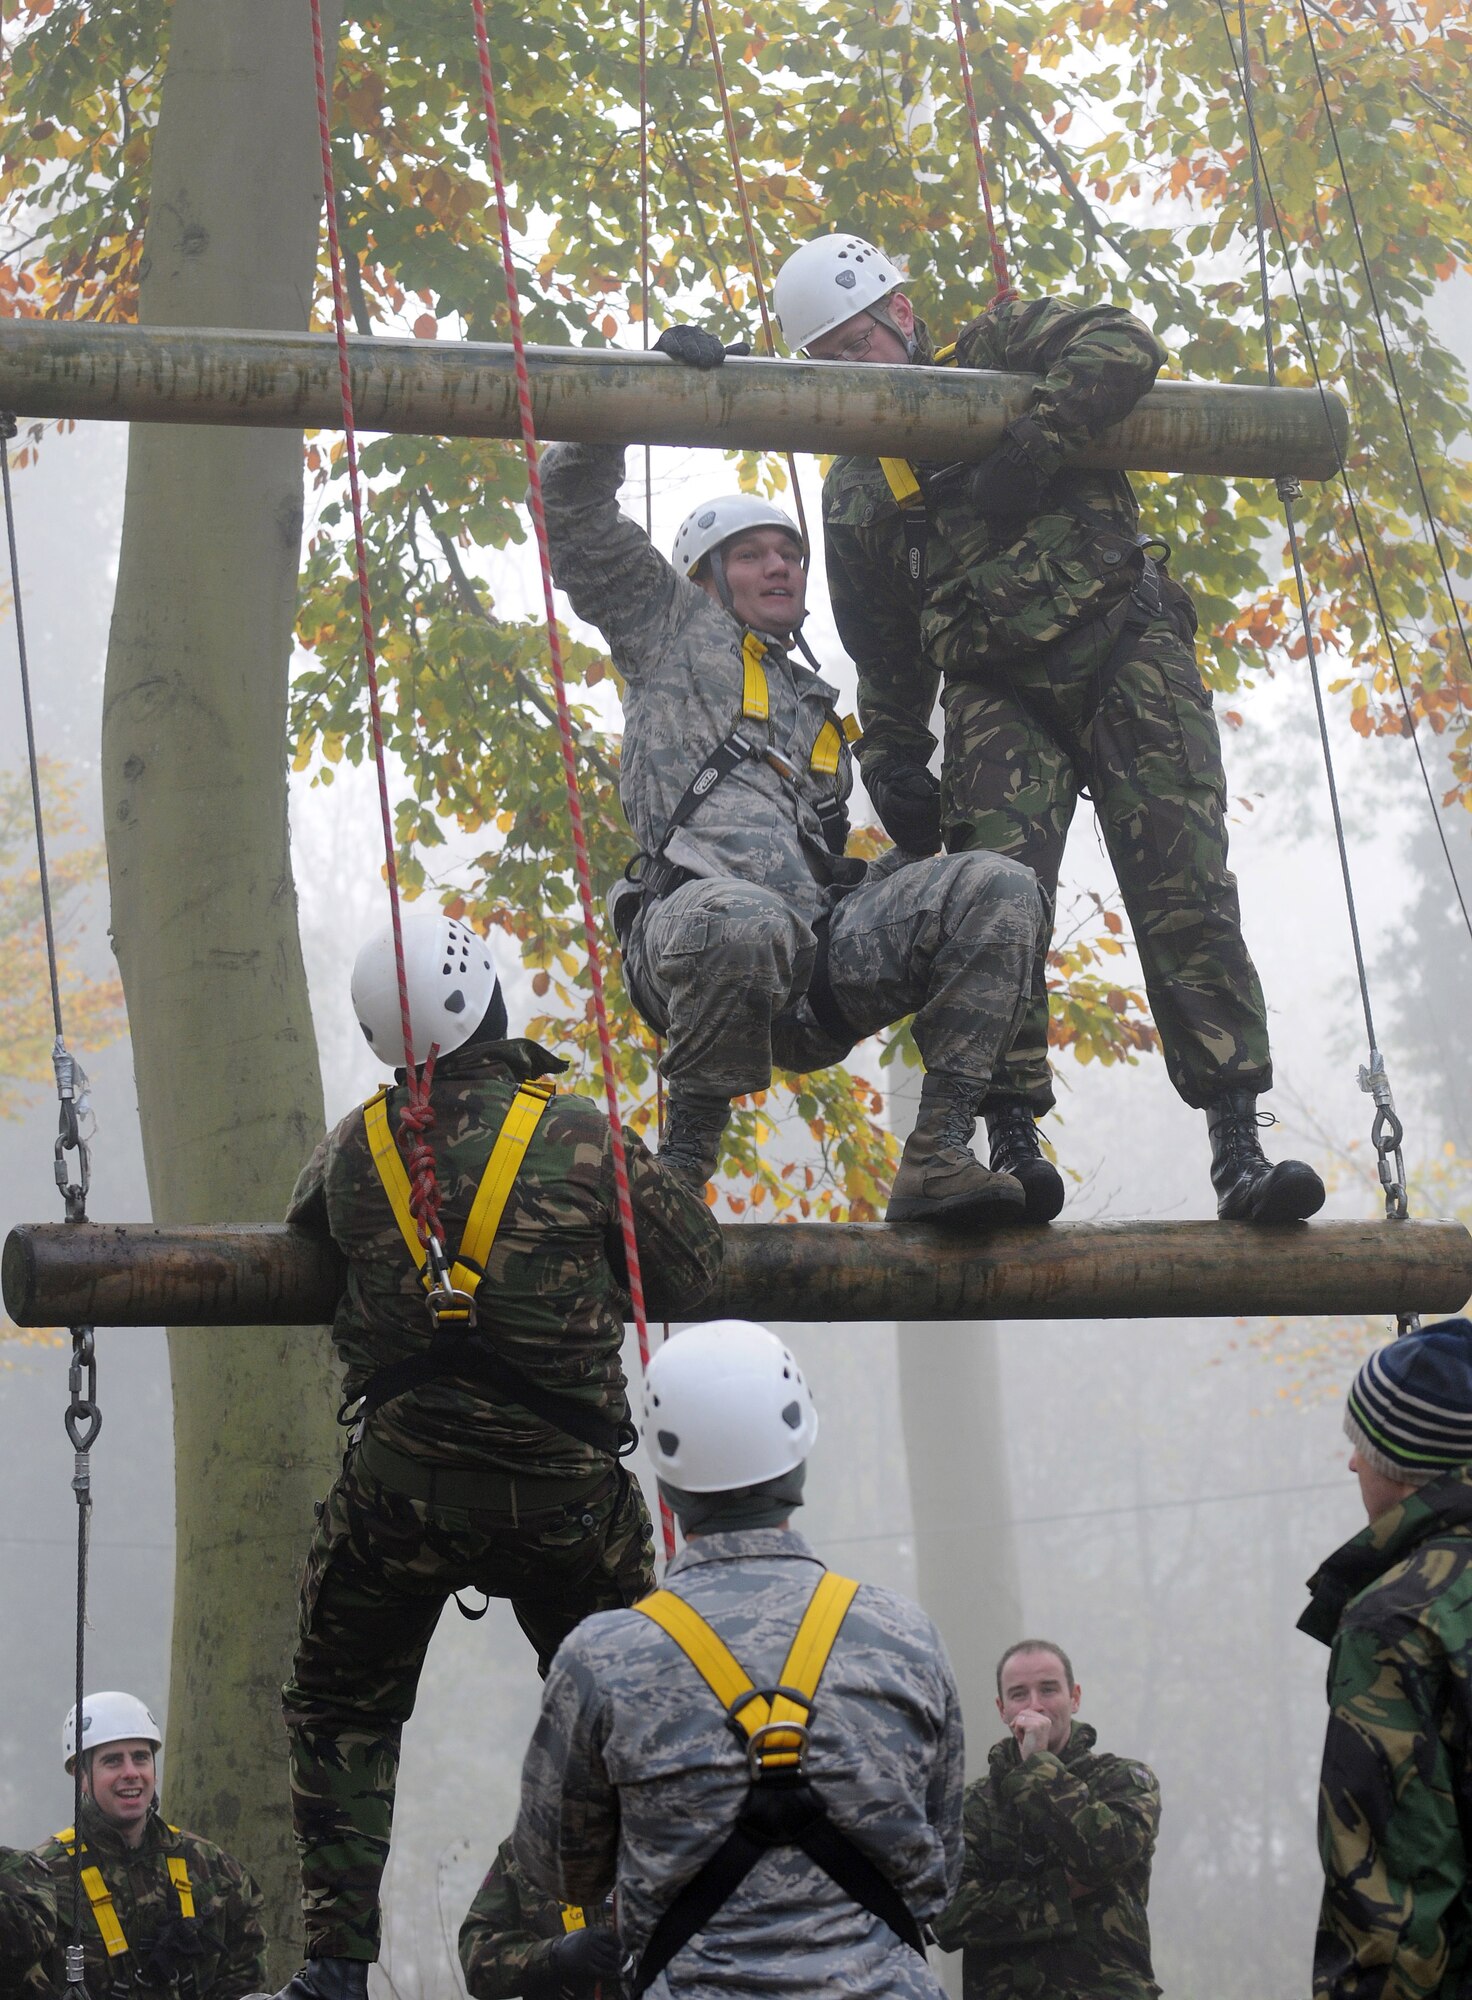 RAF MILDENHALL, England -- Master Sgt. Jason Conley, 48th Medical Support Squadron (second from top),  participates in the high-ropes course at RAF Marham with British airmen as part of the RAF's Leadership, Ethos and Air Power Day Nov. 9. Forty U.S. Airmen from RAFs Mildenhall and Lakenheath joined the exercise to build relationships and share leadership techniques. (U.S. Air Force photo/Senior Airman Thomas Trower) 